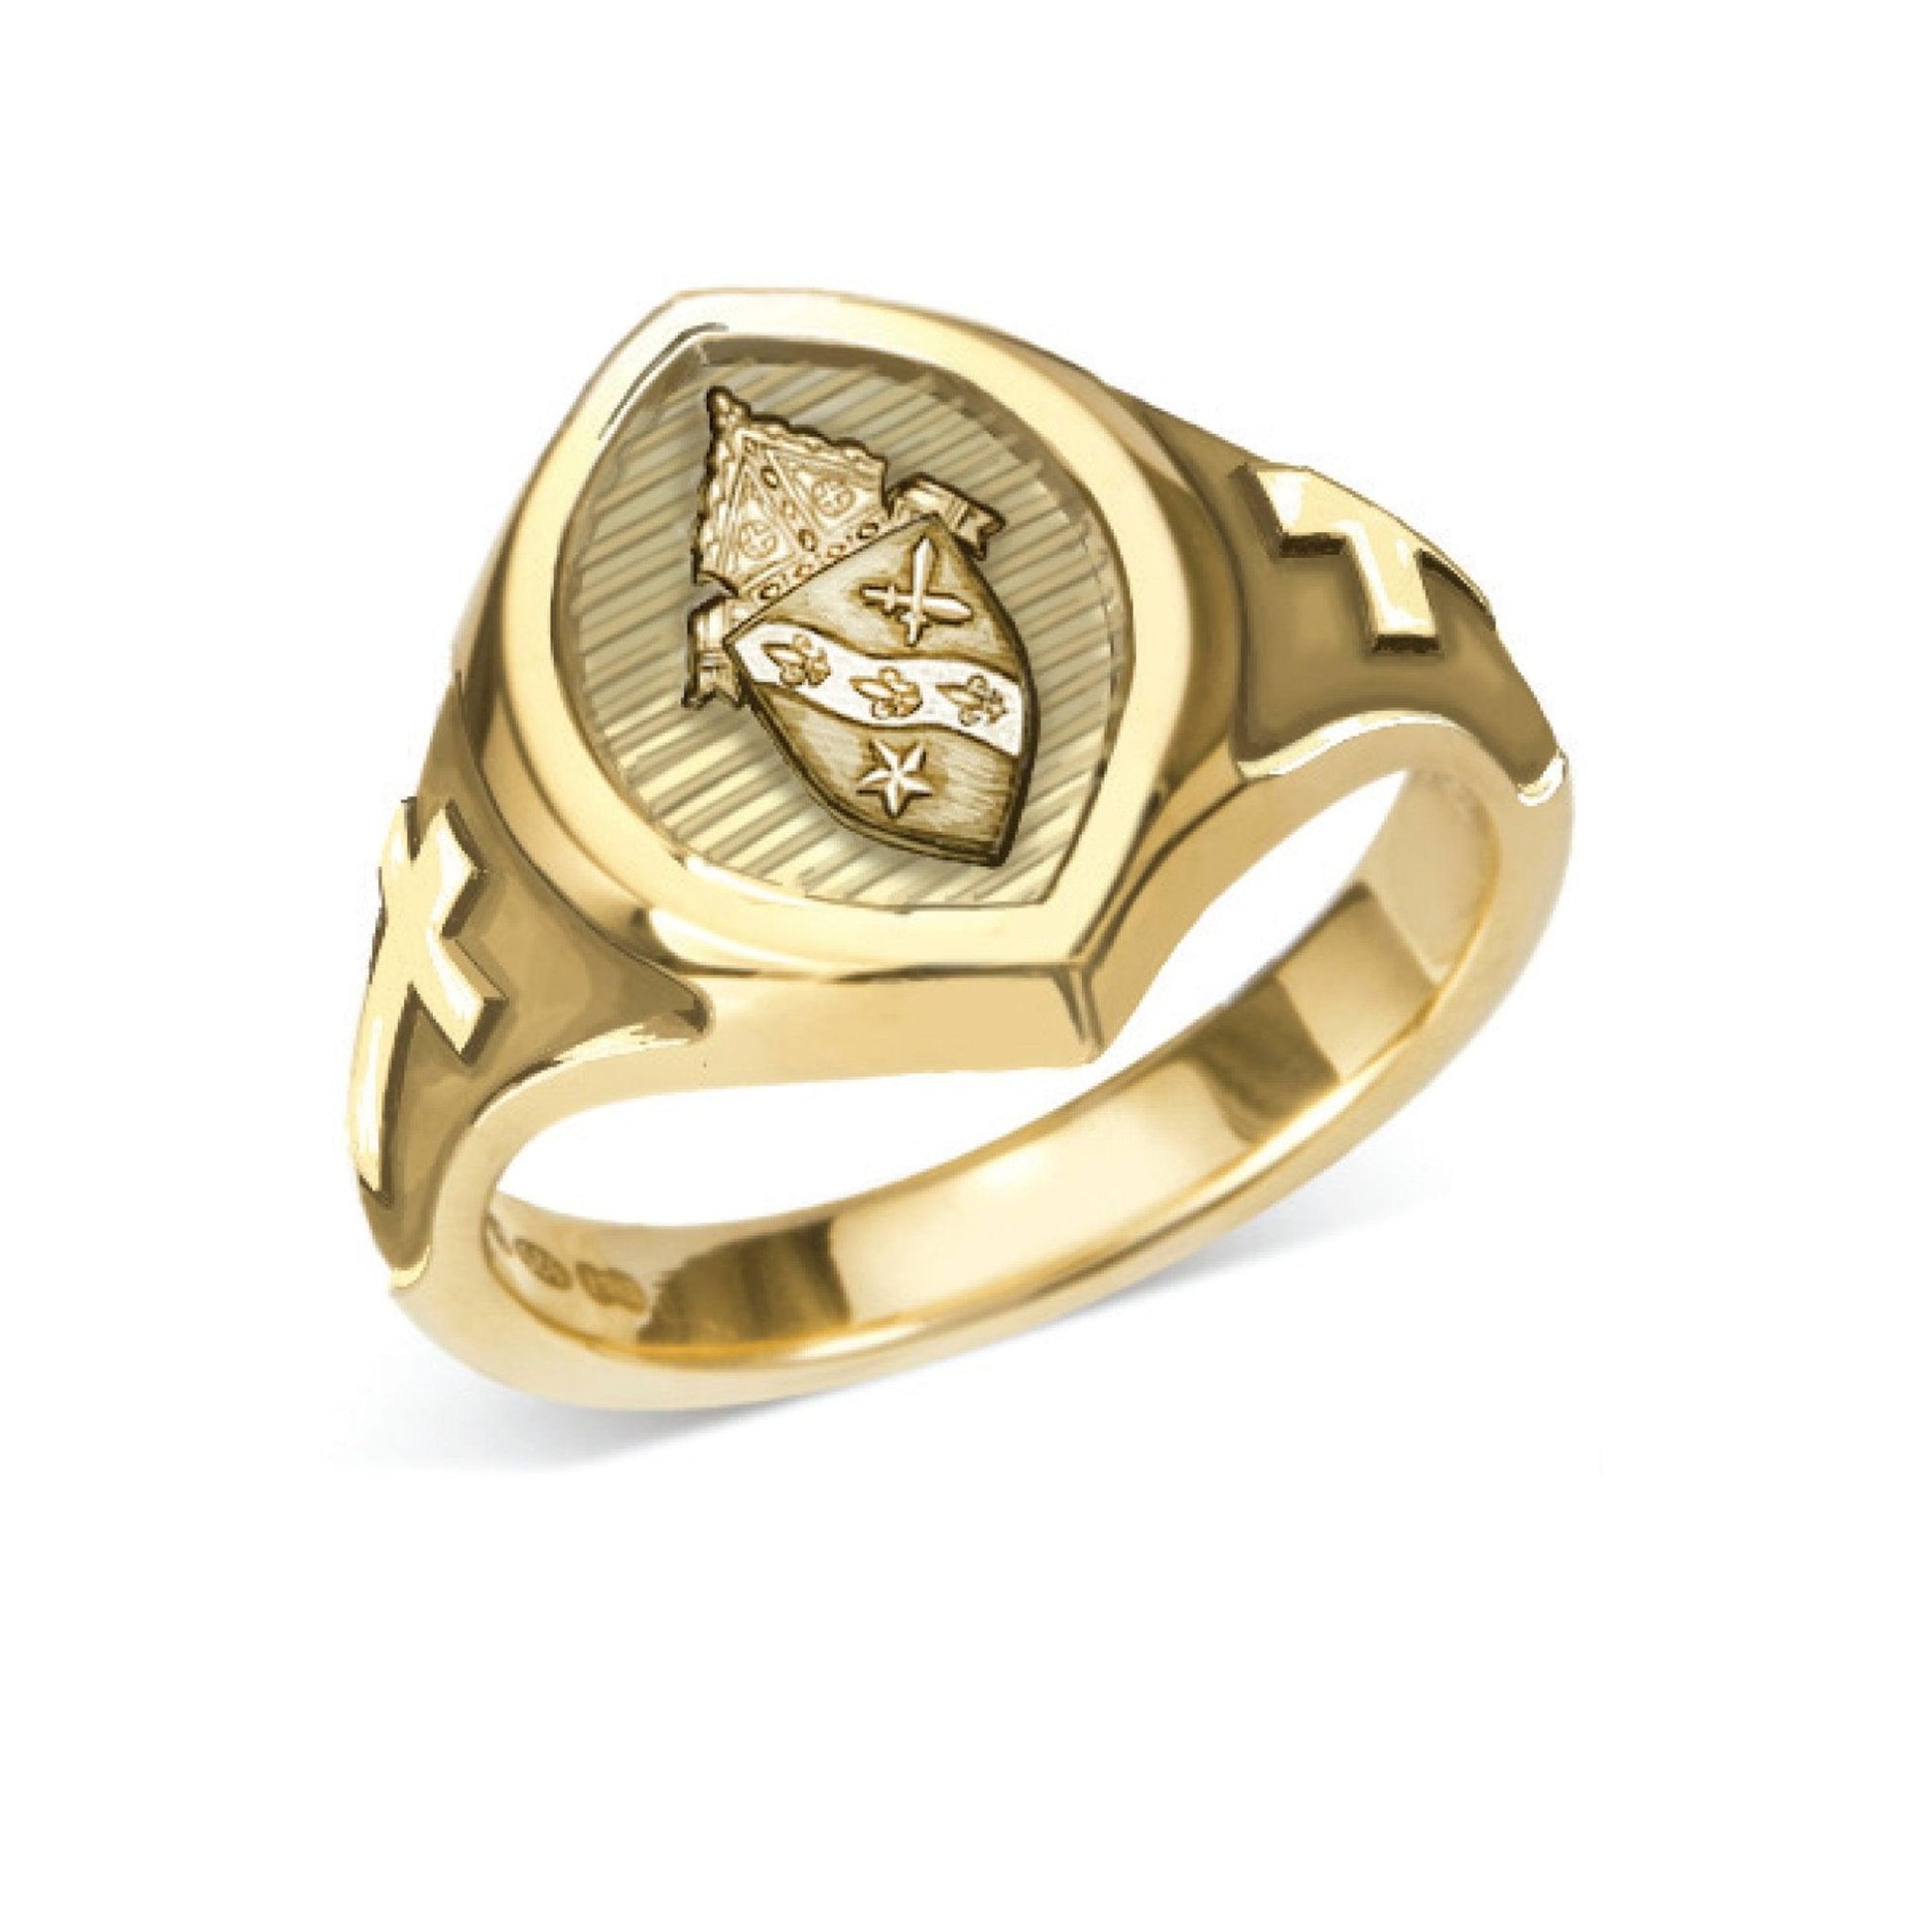 Gold Custom Engraved Bishop Ring with Crosses - Watts & Co.